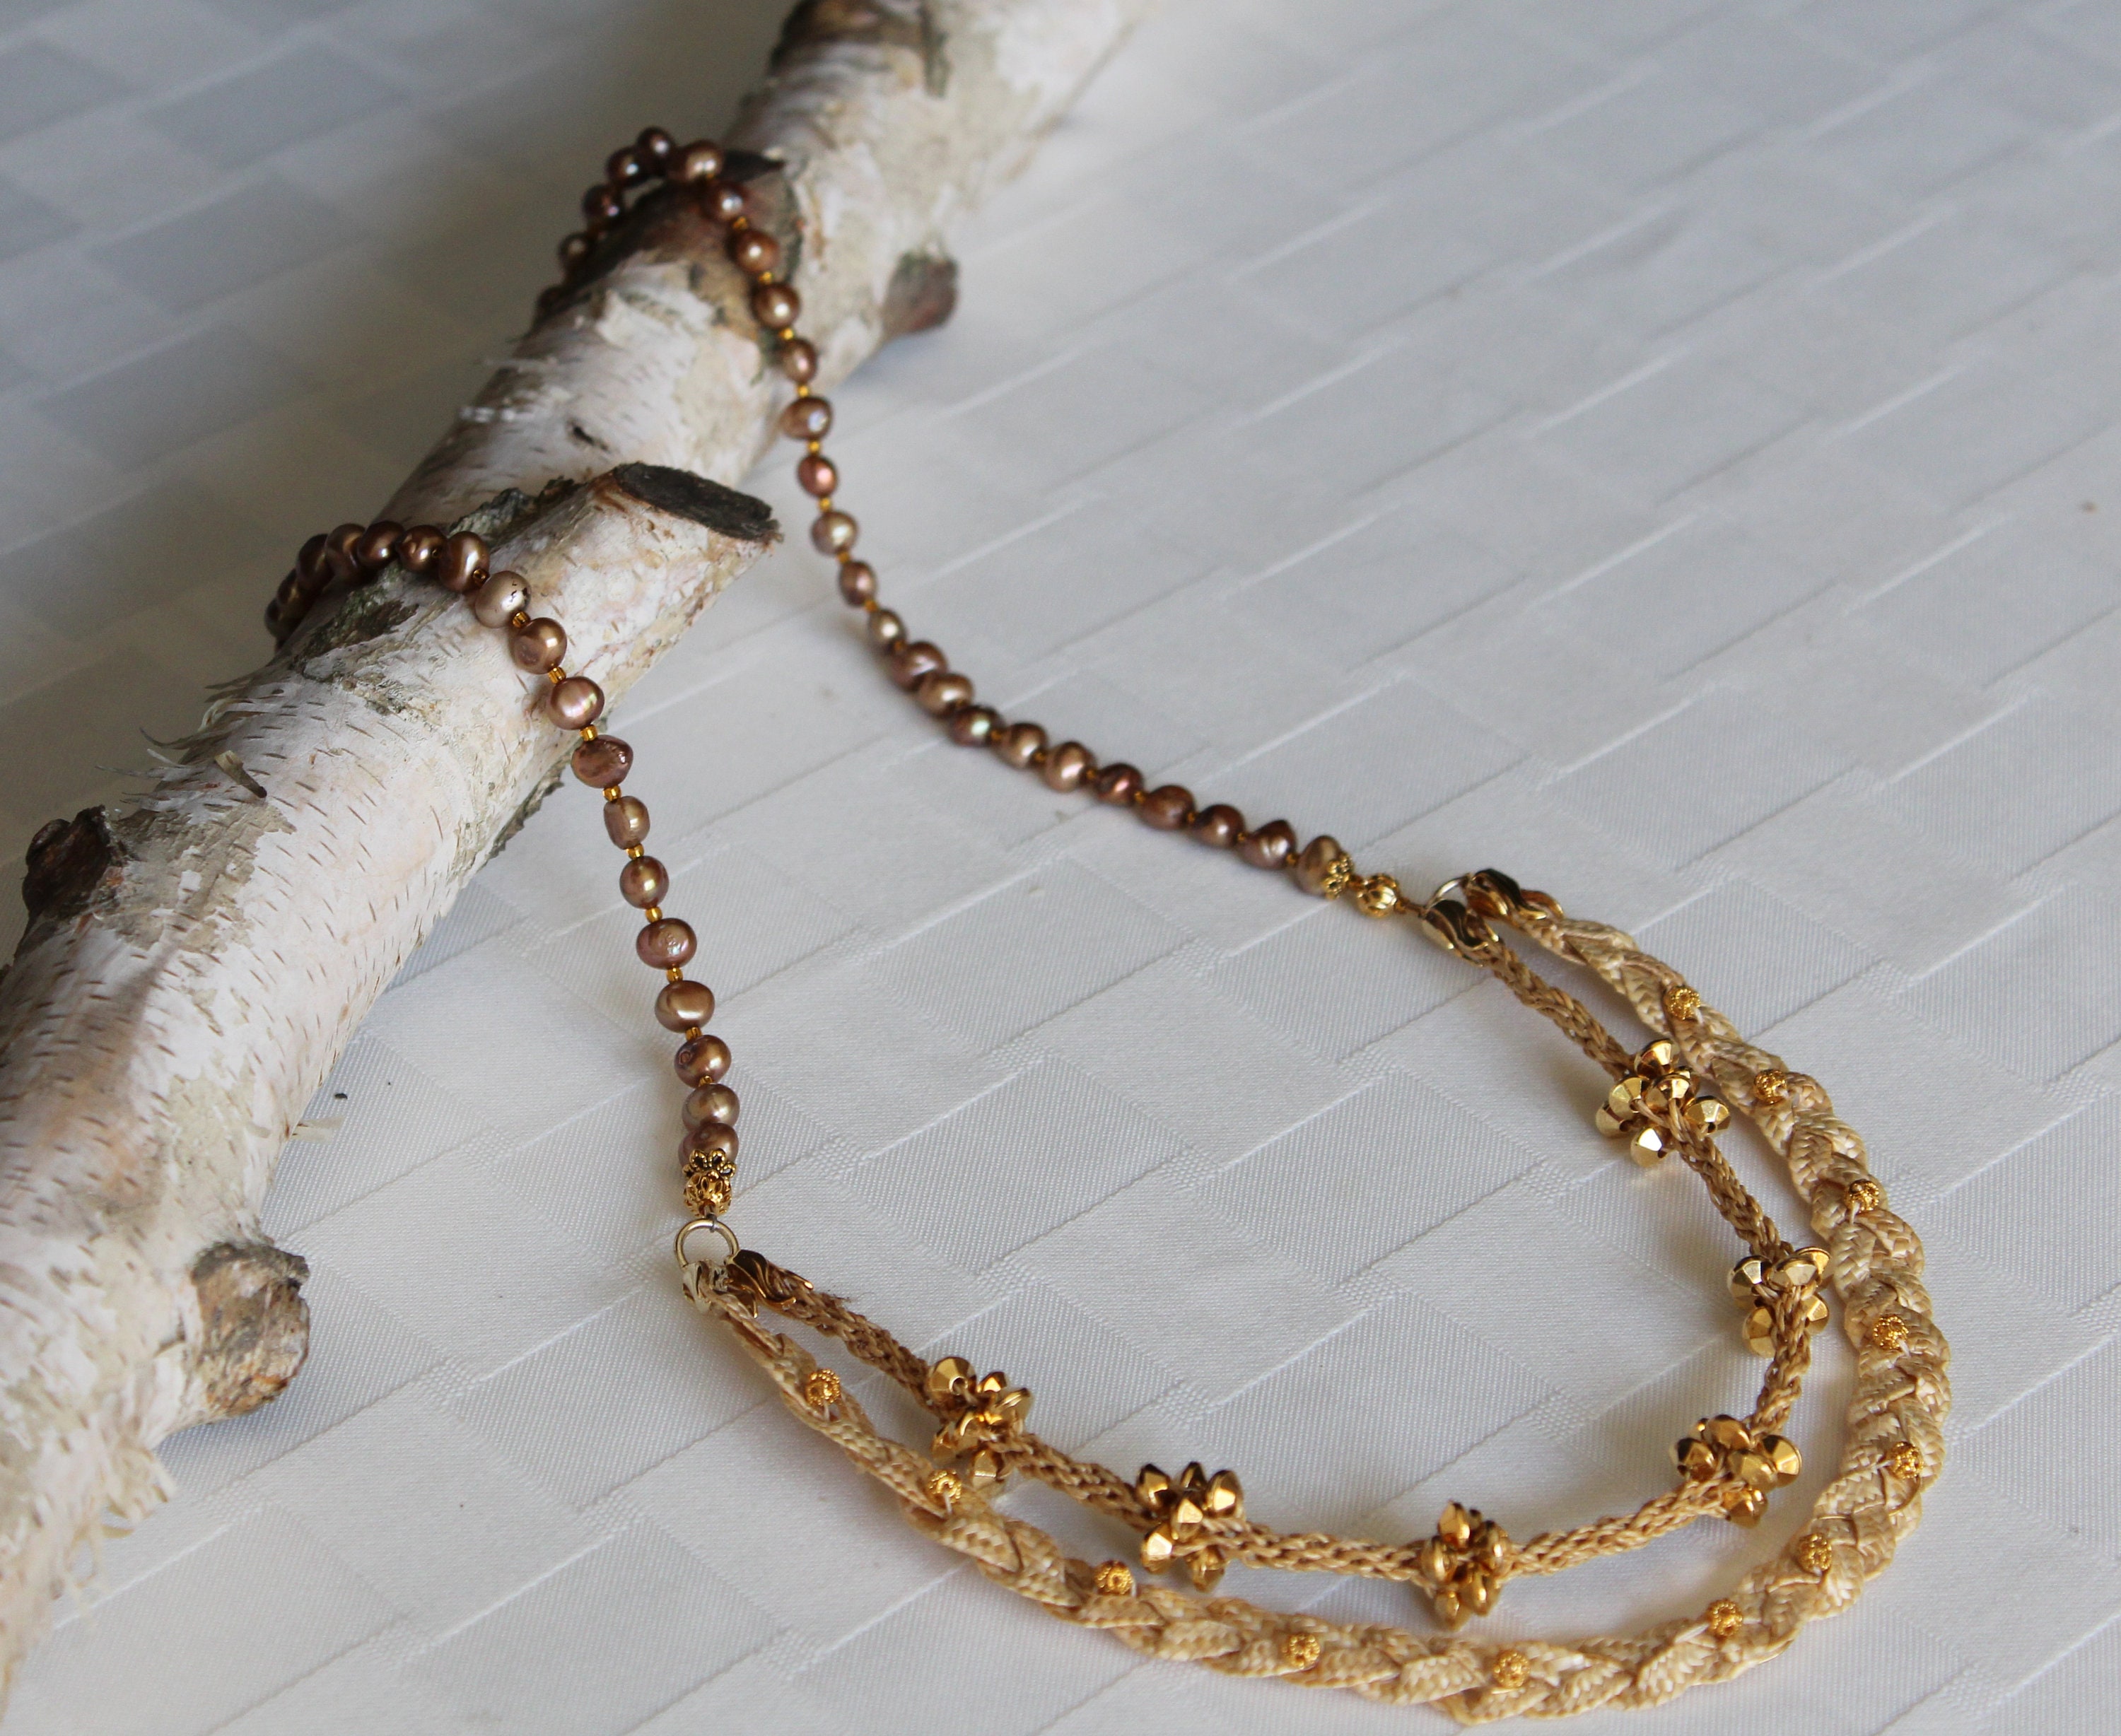 Original Handmade Straw Art Necklace With Pearls - Etsy